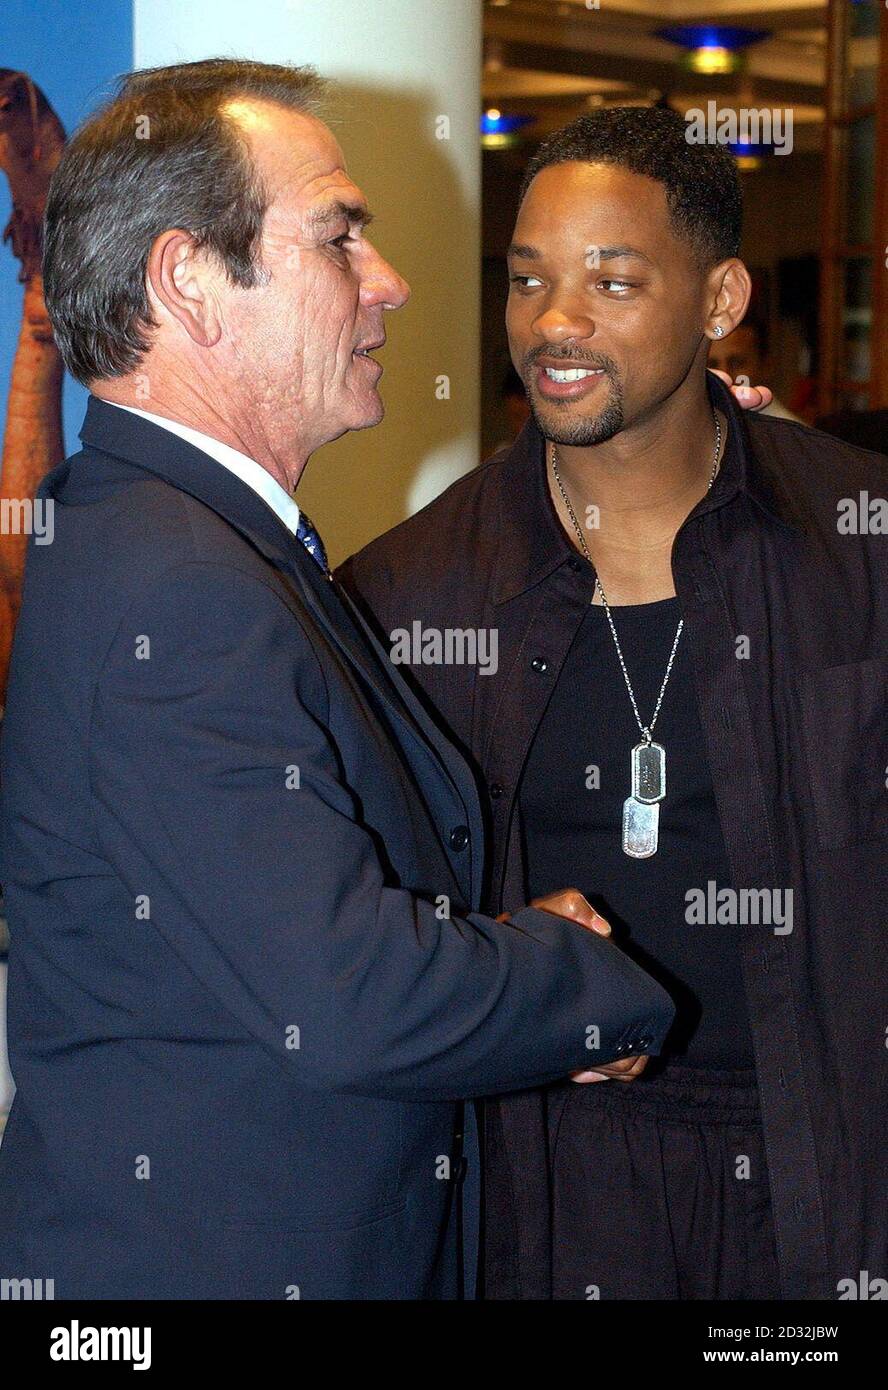 Actors Tommy Lee Jones (L) and Will Smith during a photocall at the BAFTA offices in London's Piccadilly, to promote his new film 'Men In Black 2'.  Stock Photo